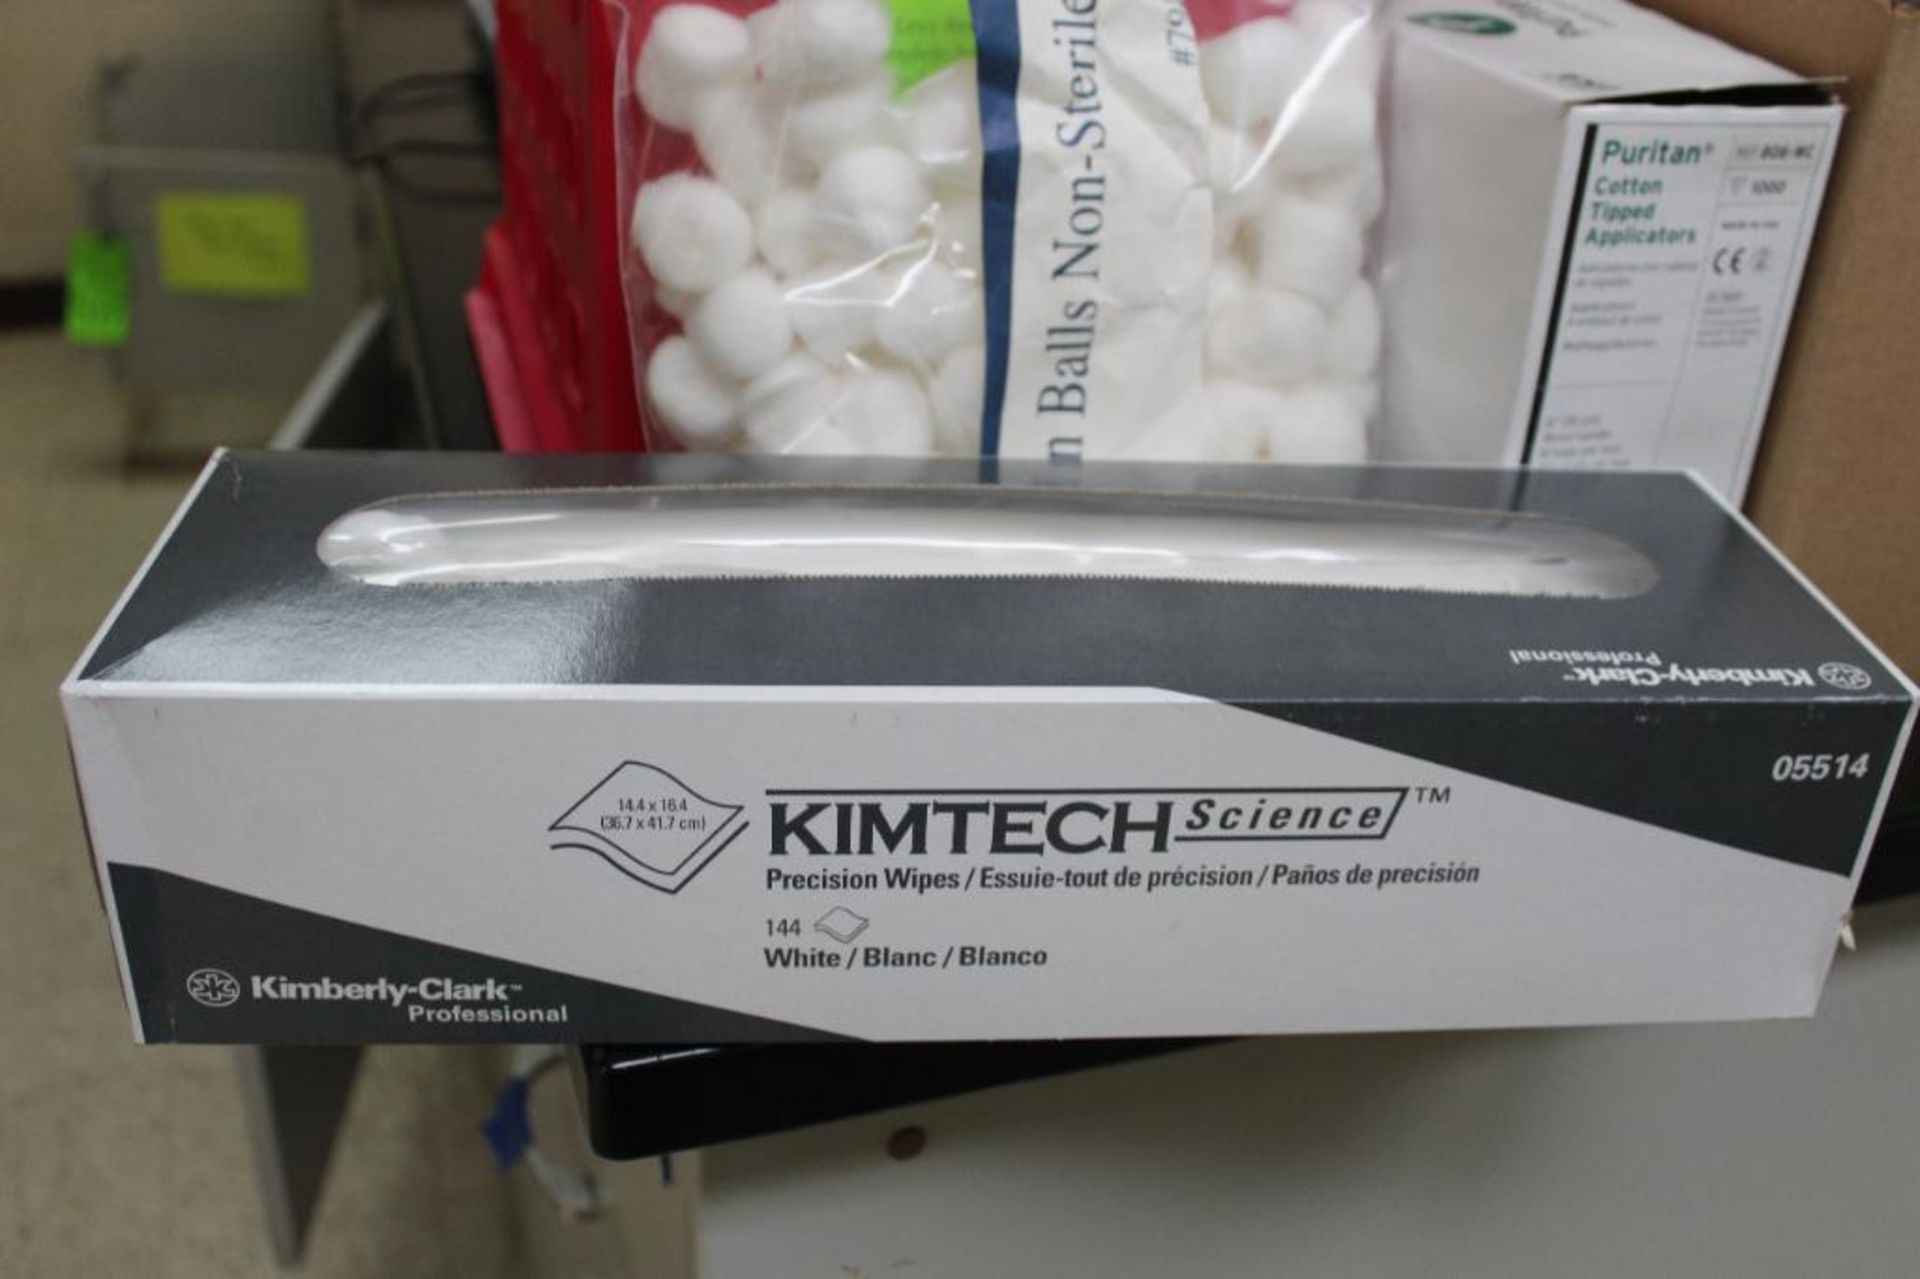 Lot of Kimberly Clark Precision Wipes, Puritan Cotton Tipped Applicators and Non Sterile Cottonballs